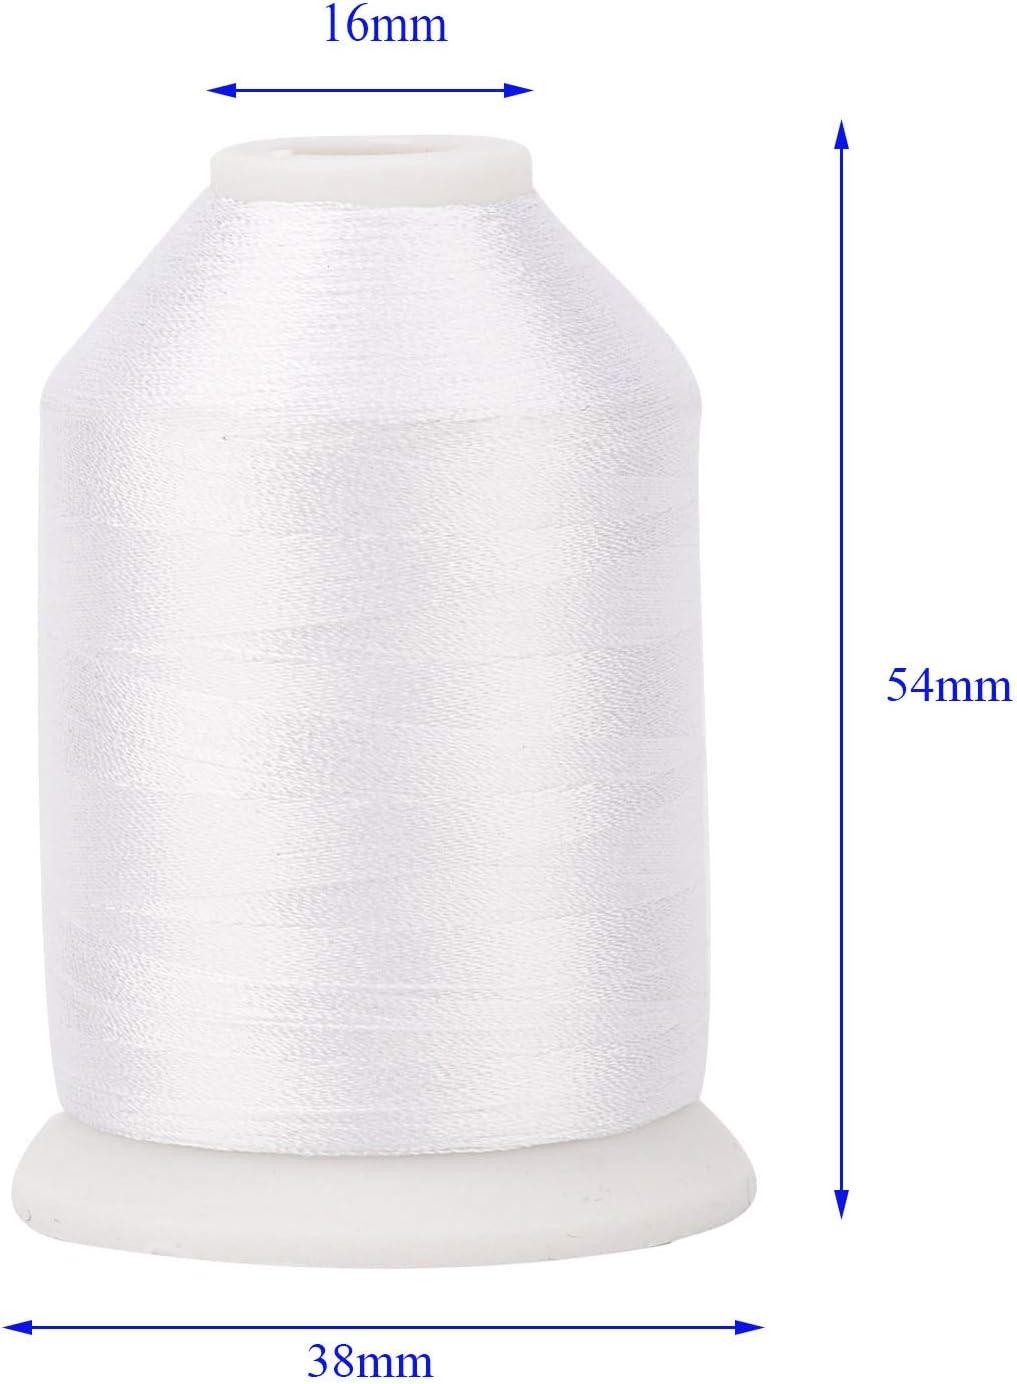 Set of 2 Huge White Spools Bobbin Thread for Embroidery Machine and Sewing